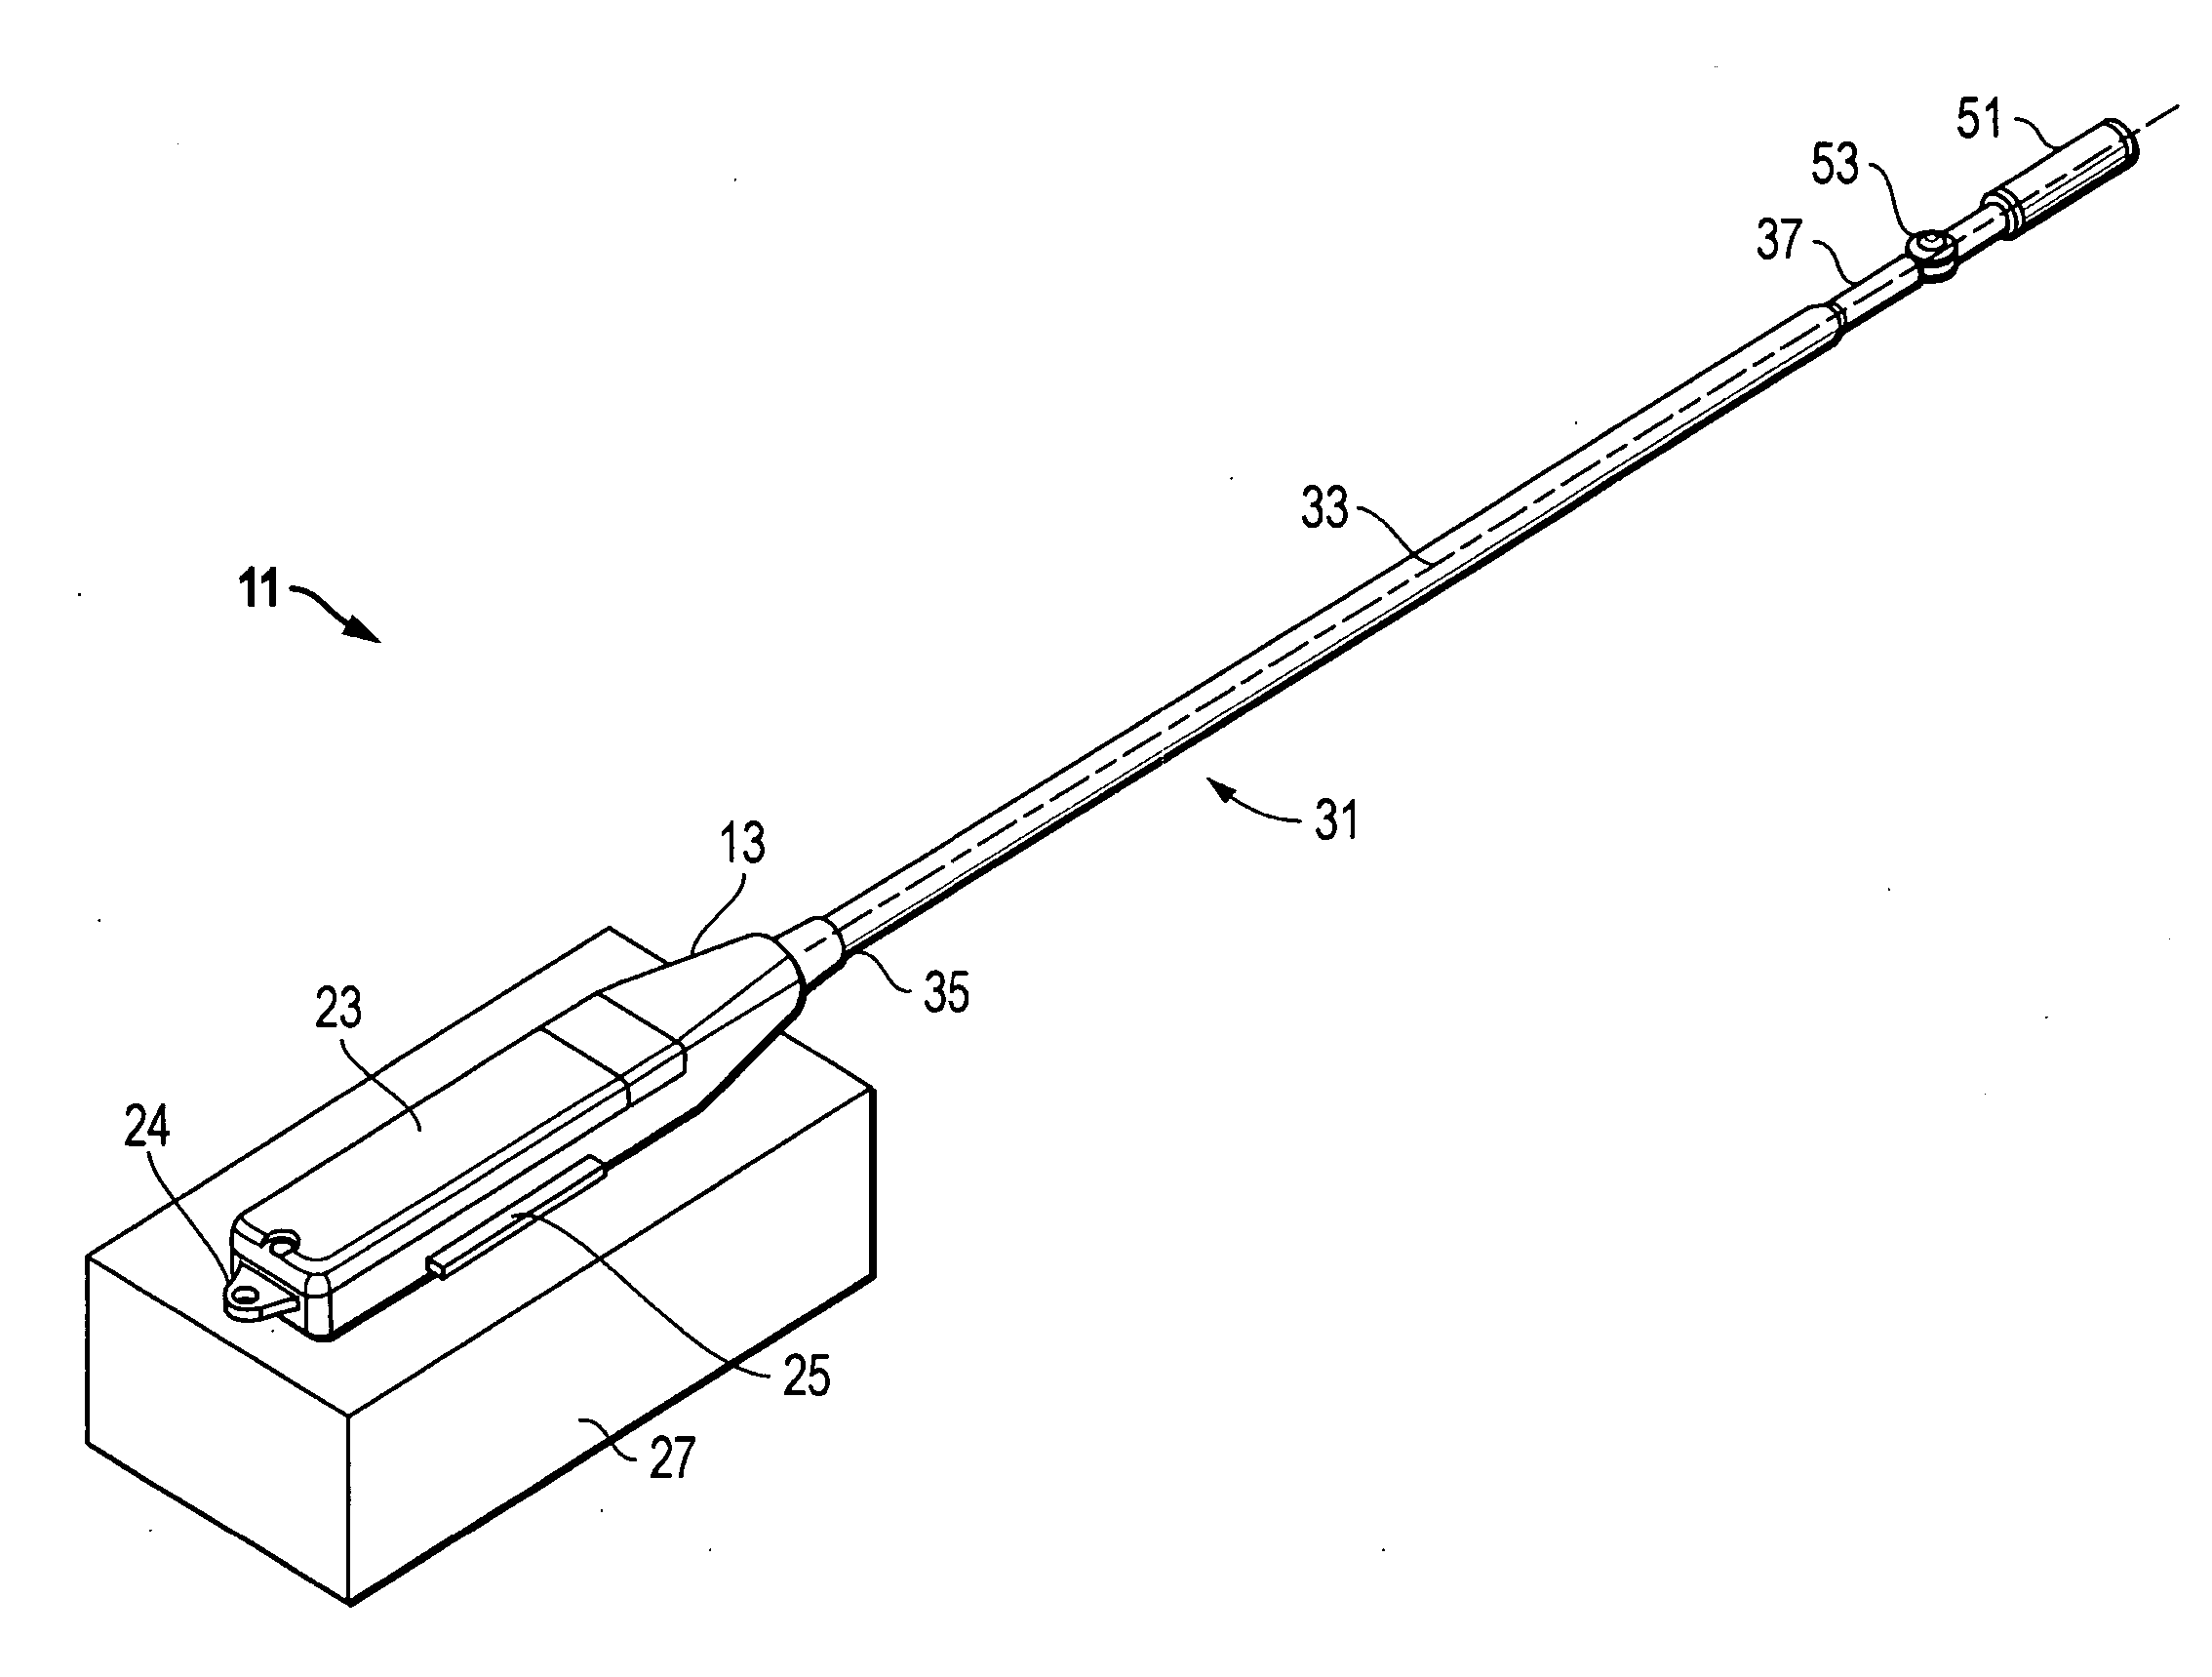 Highly articulated electromagnetic pick-up tool